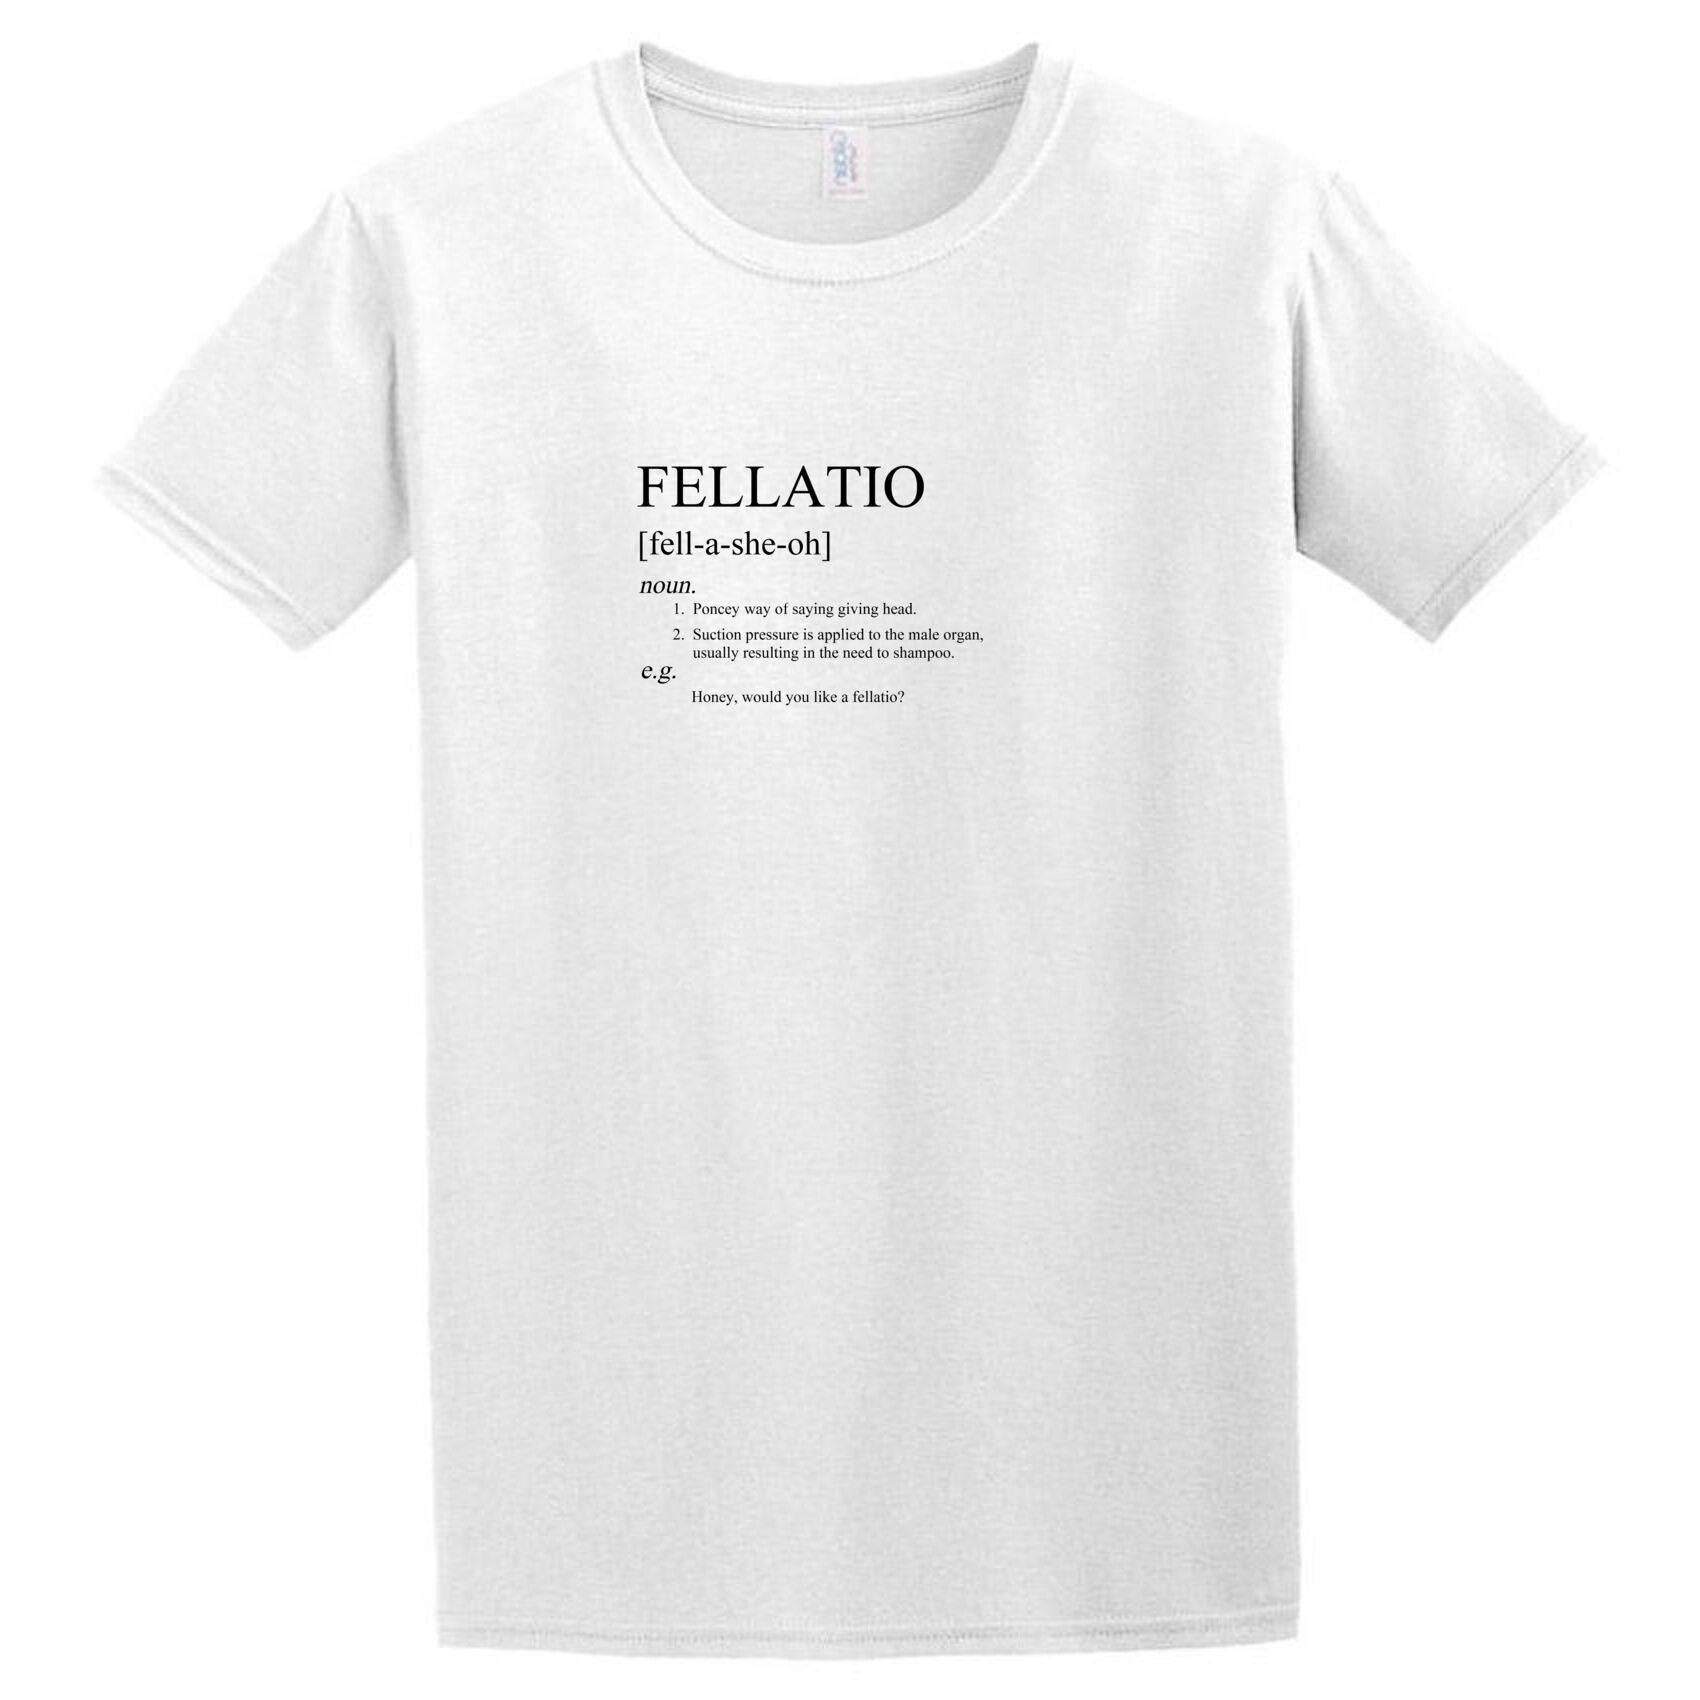 A white Fellatio T-Shirt from Twisted Gifts.